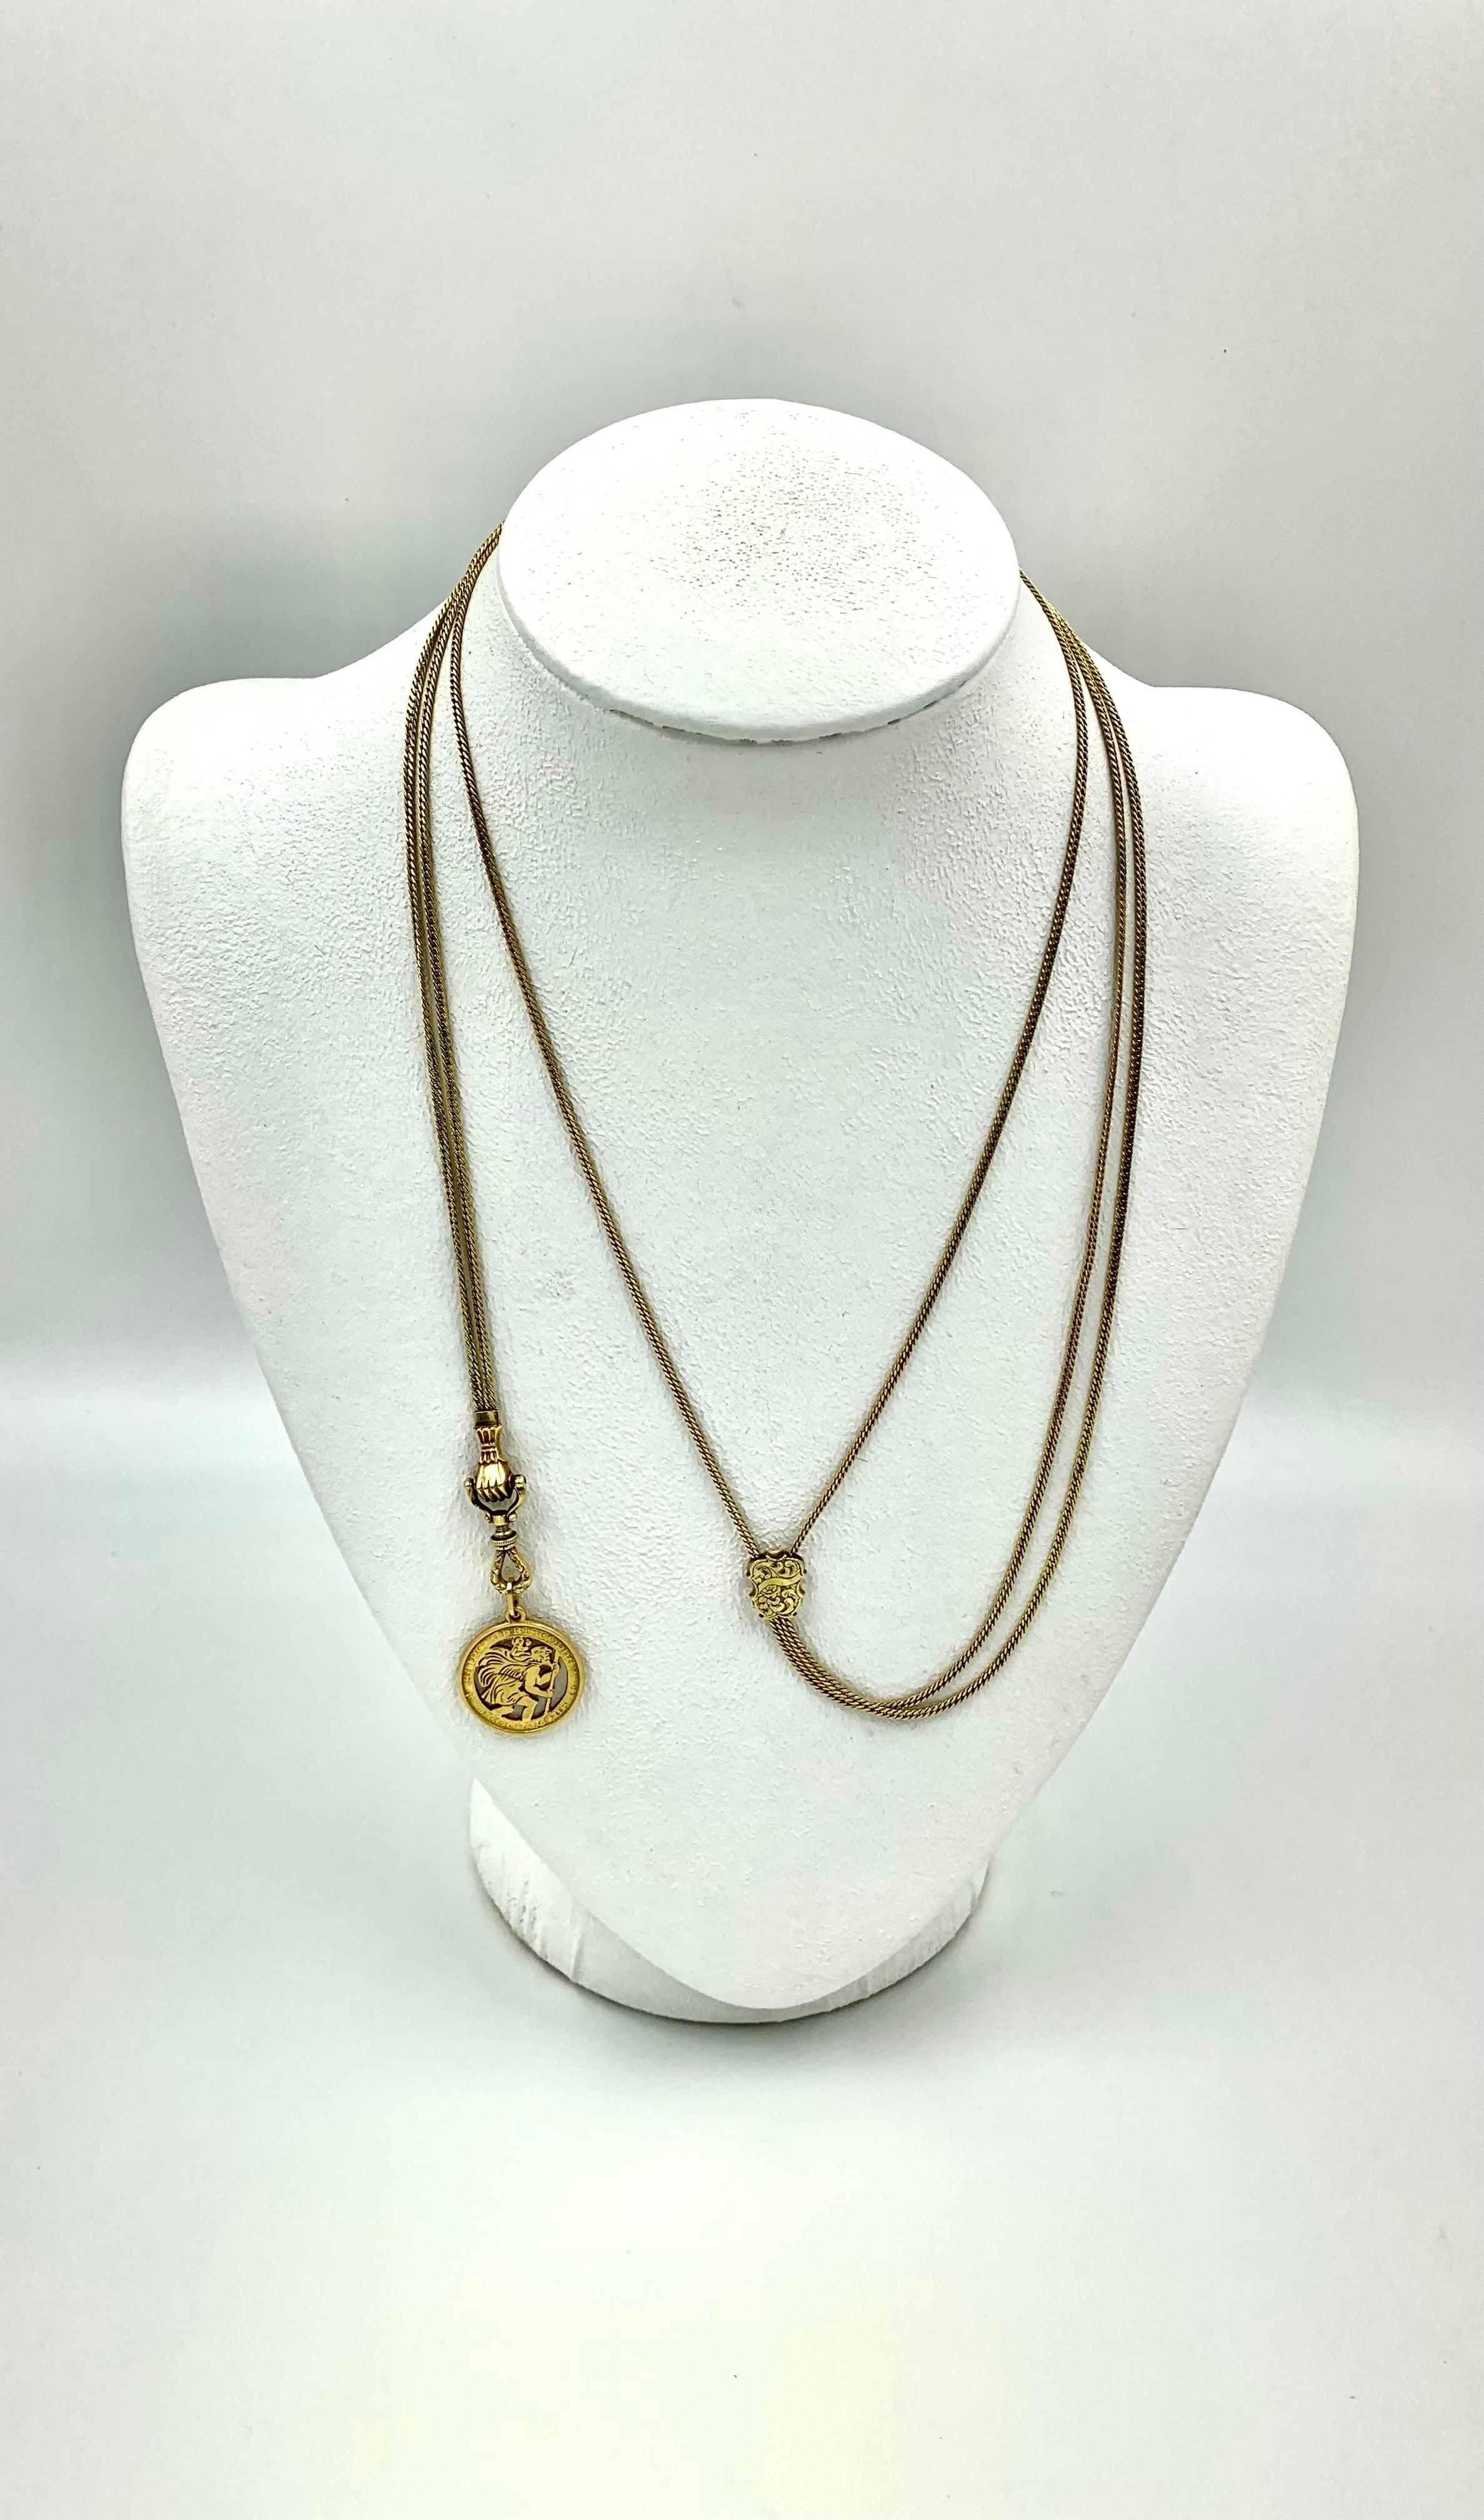 Exceptionally Long Antique 18K Gold Mano Sautoir Slide Chain Necklace Circa 1840 For Sale 6